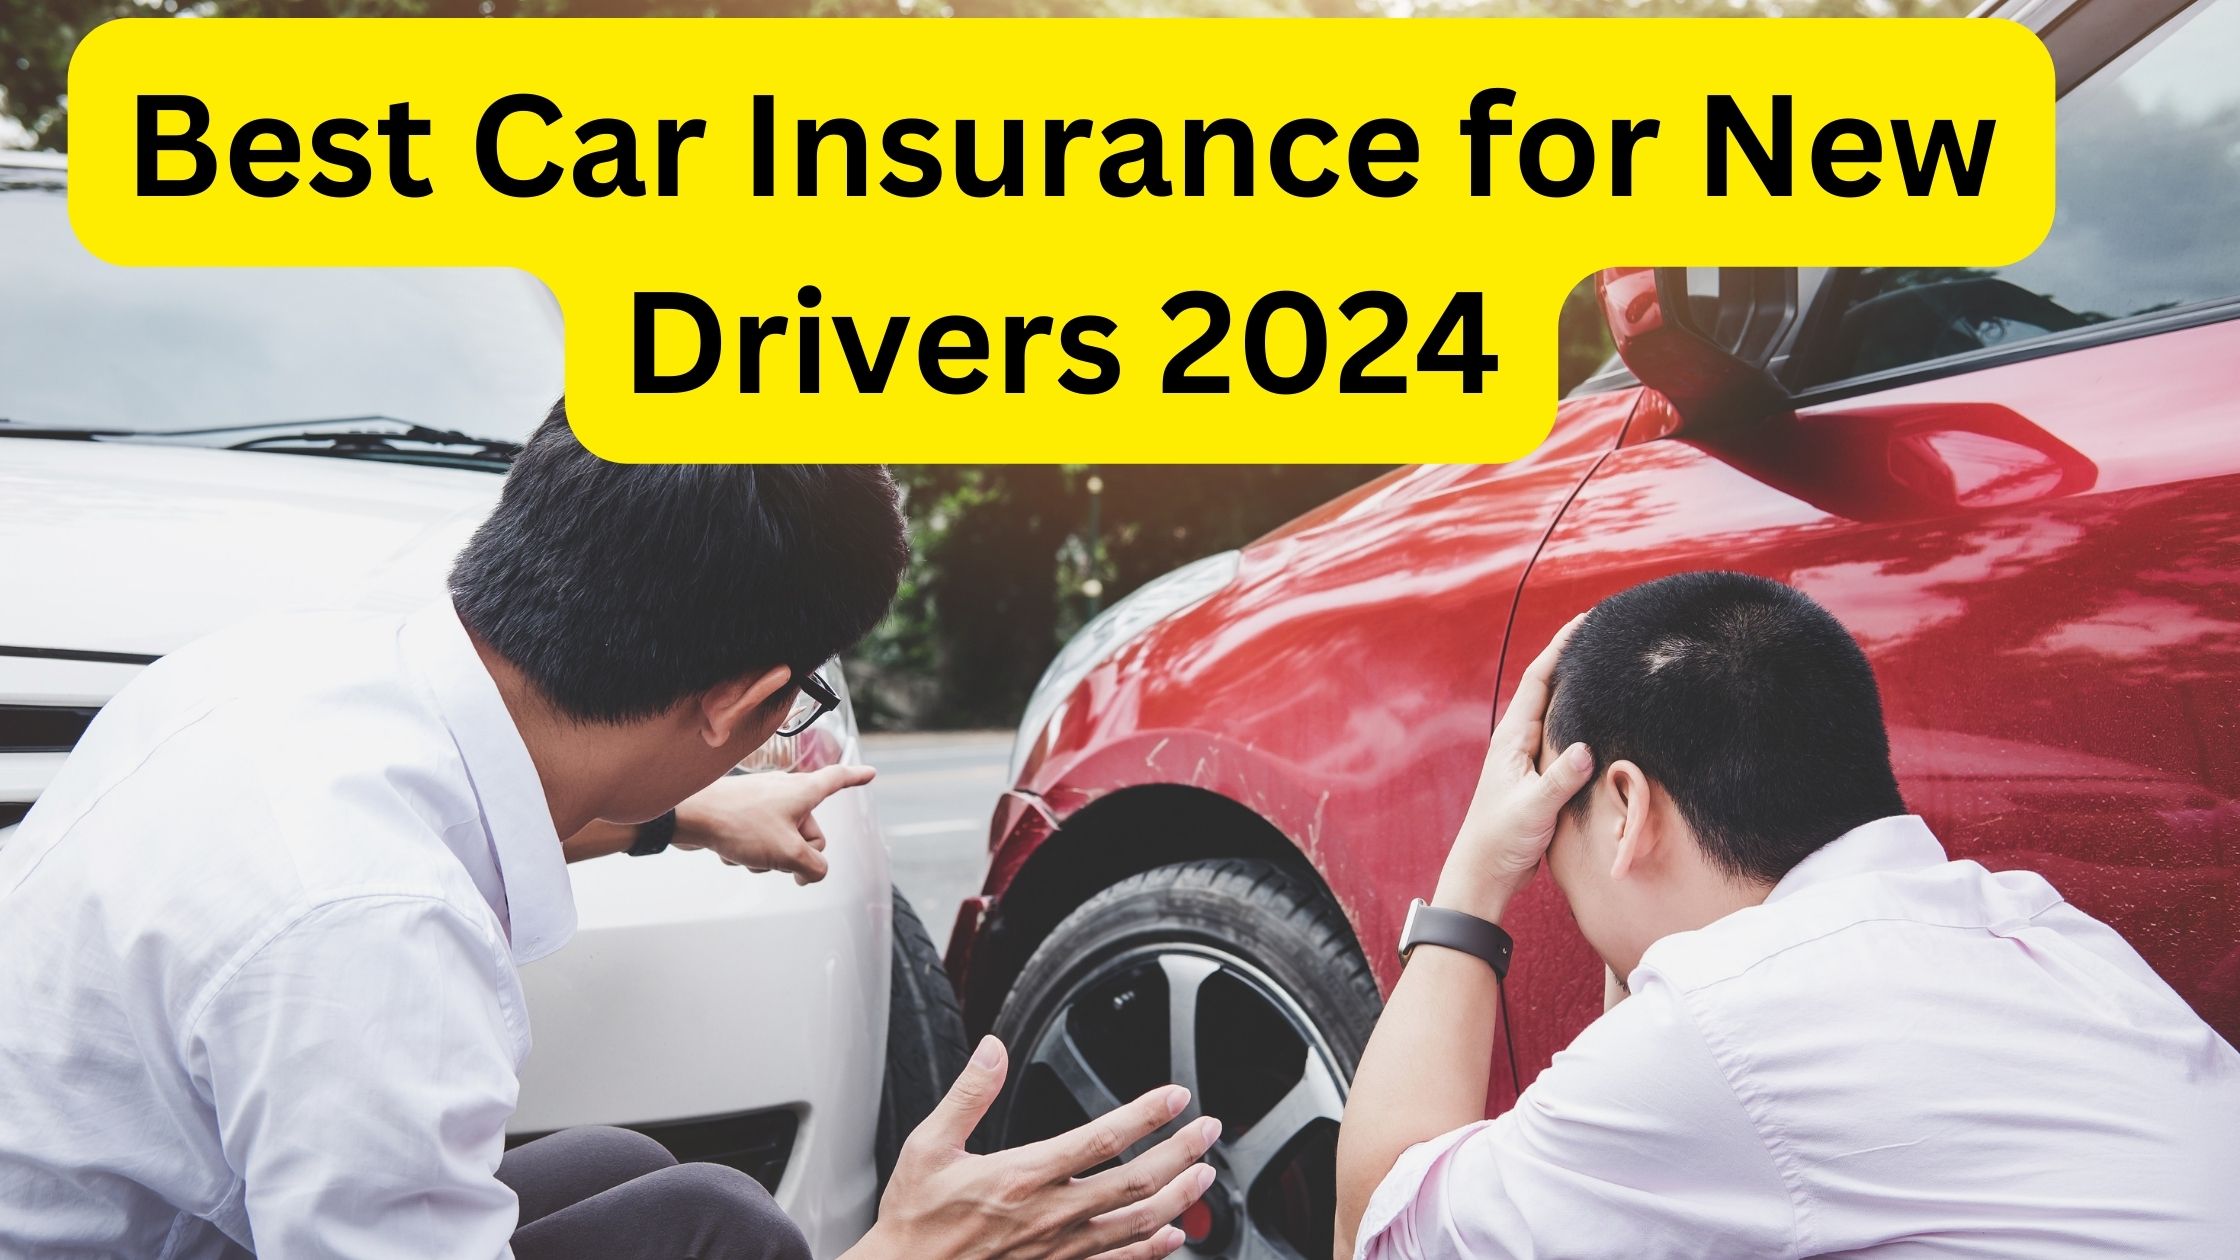 Best Car Insurance for New Drivers 2024